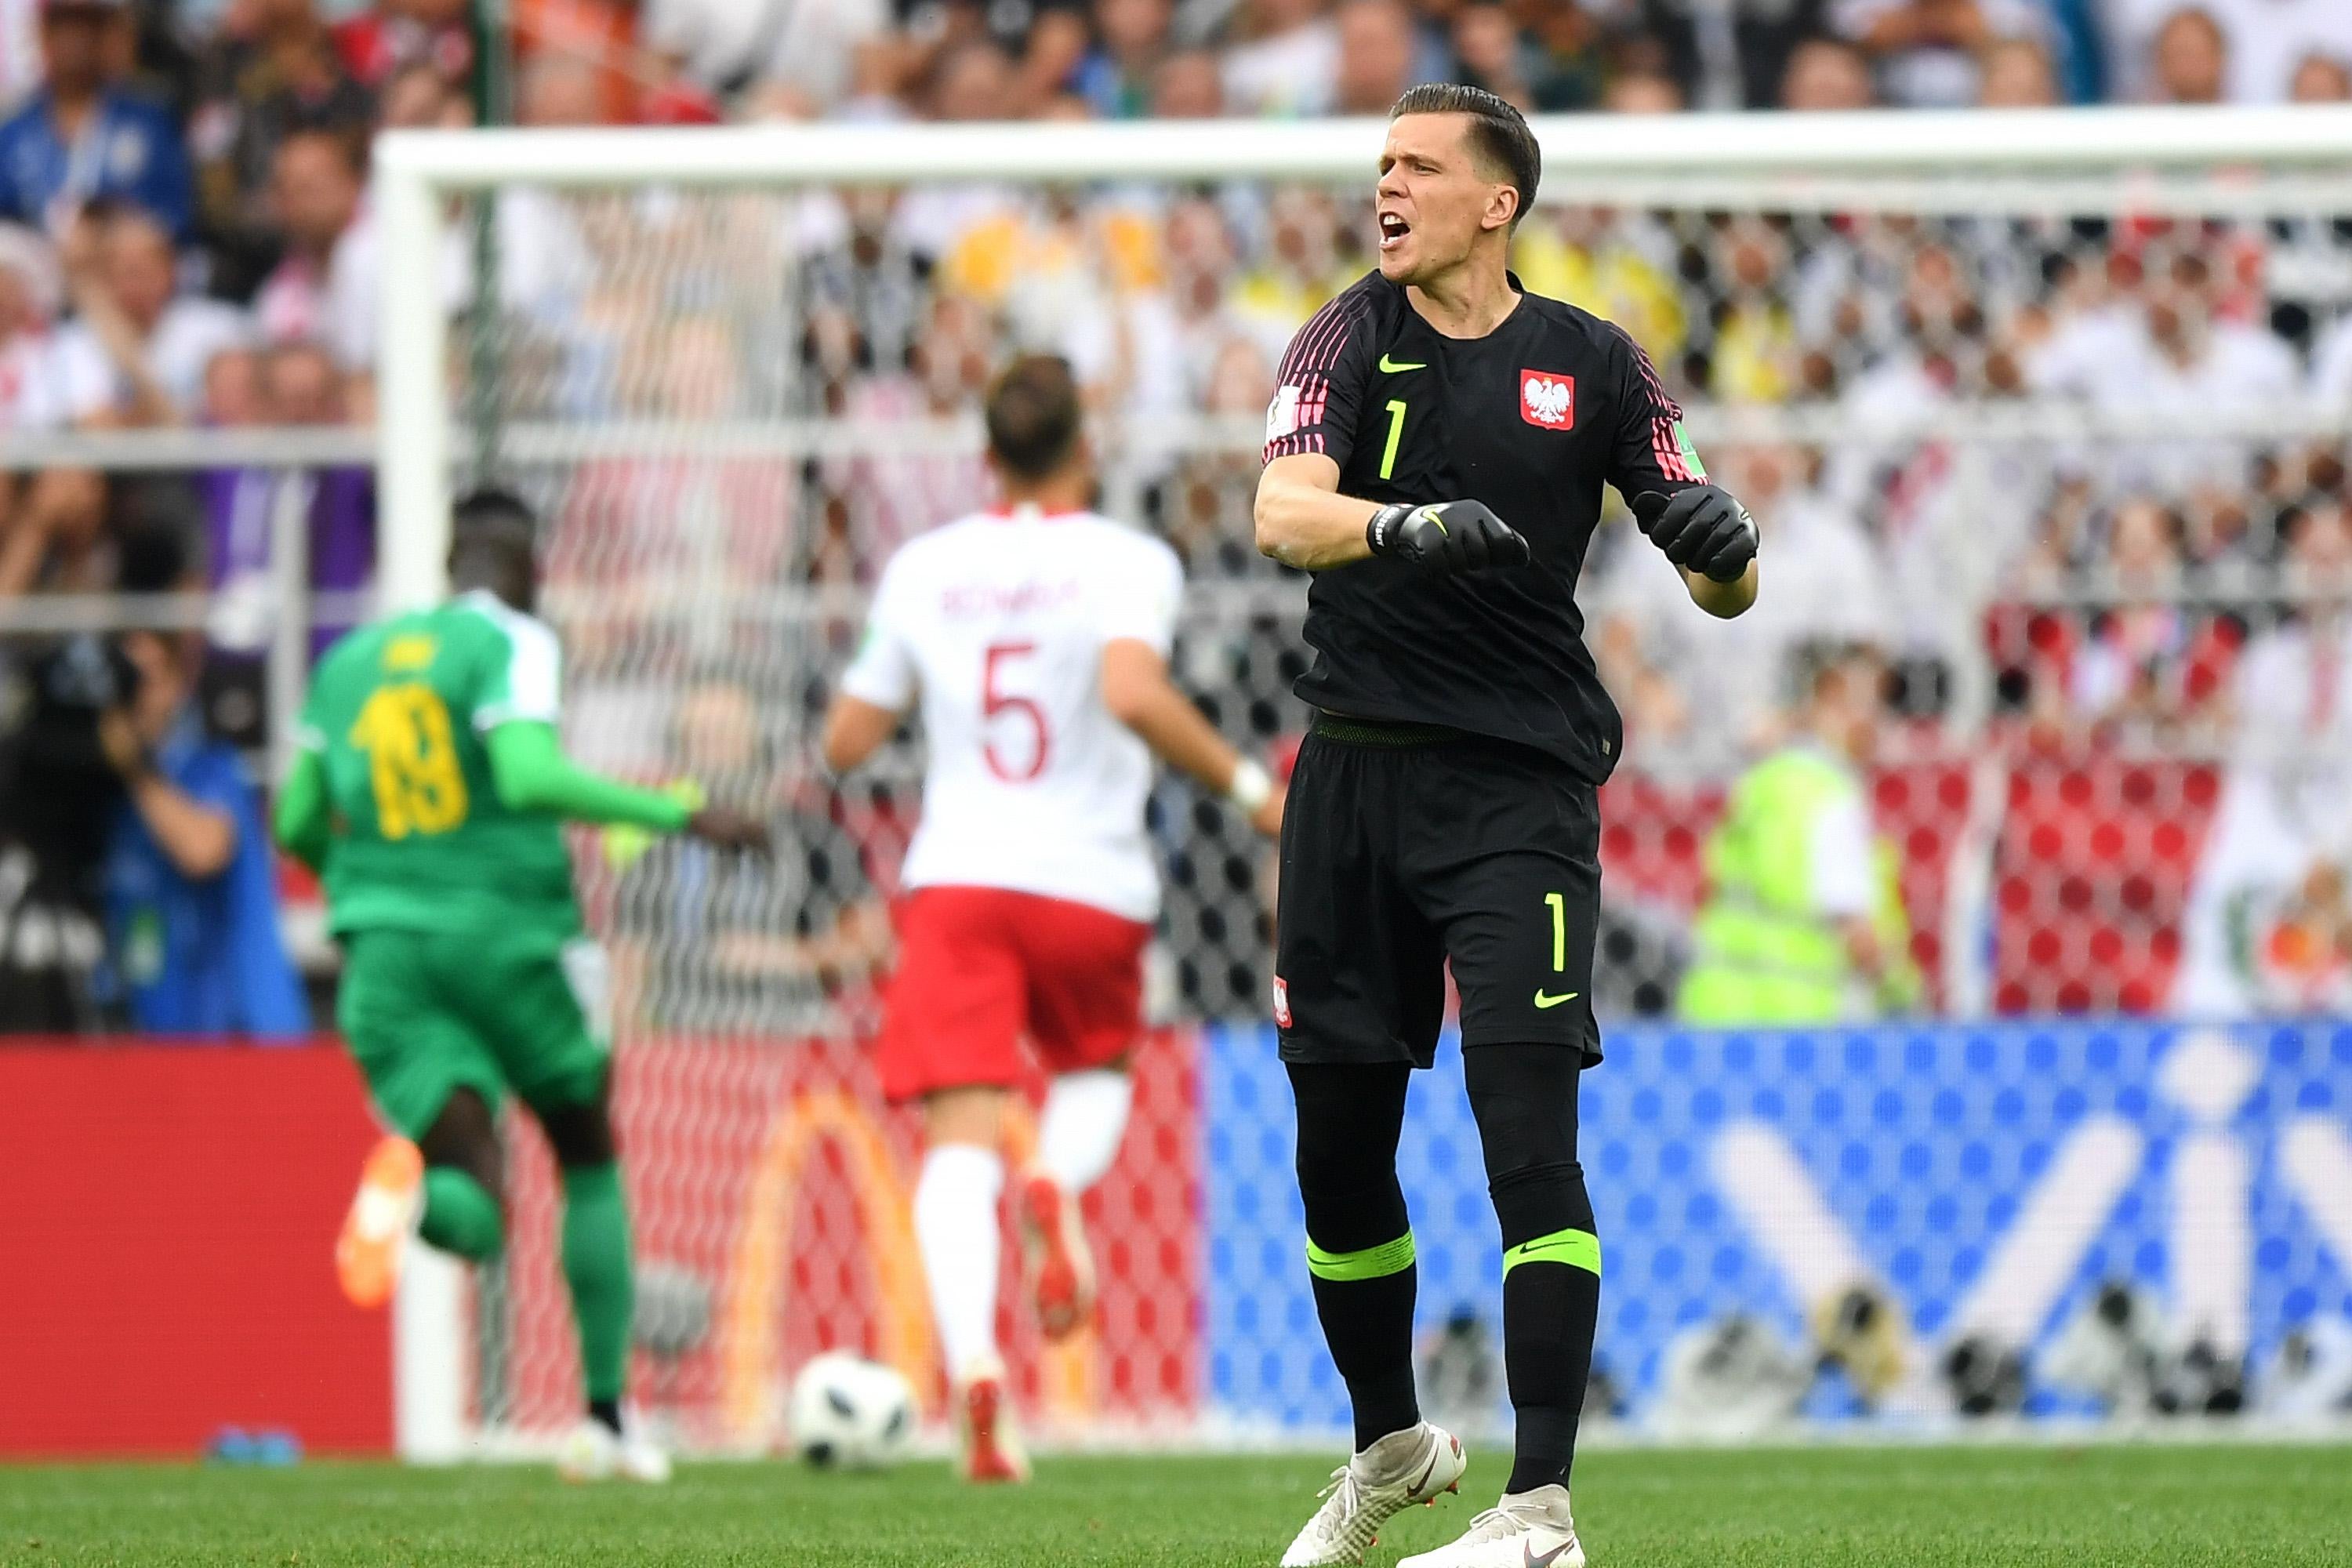 MOSCOW, RUSSIA - JUNE 19:  Wojciech Szczesny of Poland reacts after Mbaye Niang of Senegal breaks to score his team's second goal during the 2018 FIFA World Cup Russia group H match between Poland and Senegal at Spartak Stadium on June 19, 2018 in Moscow, Russia.  (Photo by Shaun Botterill/Getty Images)